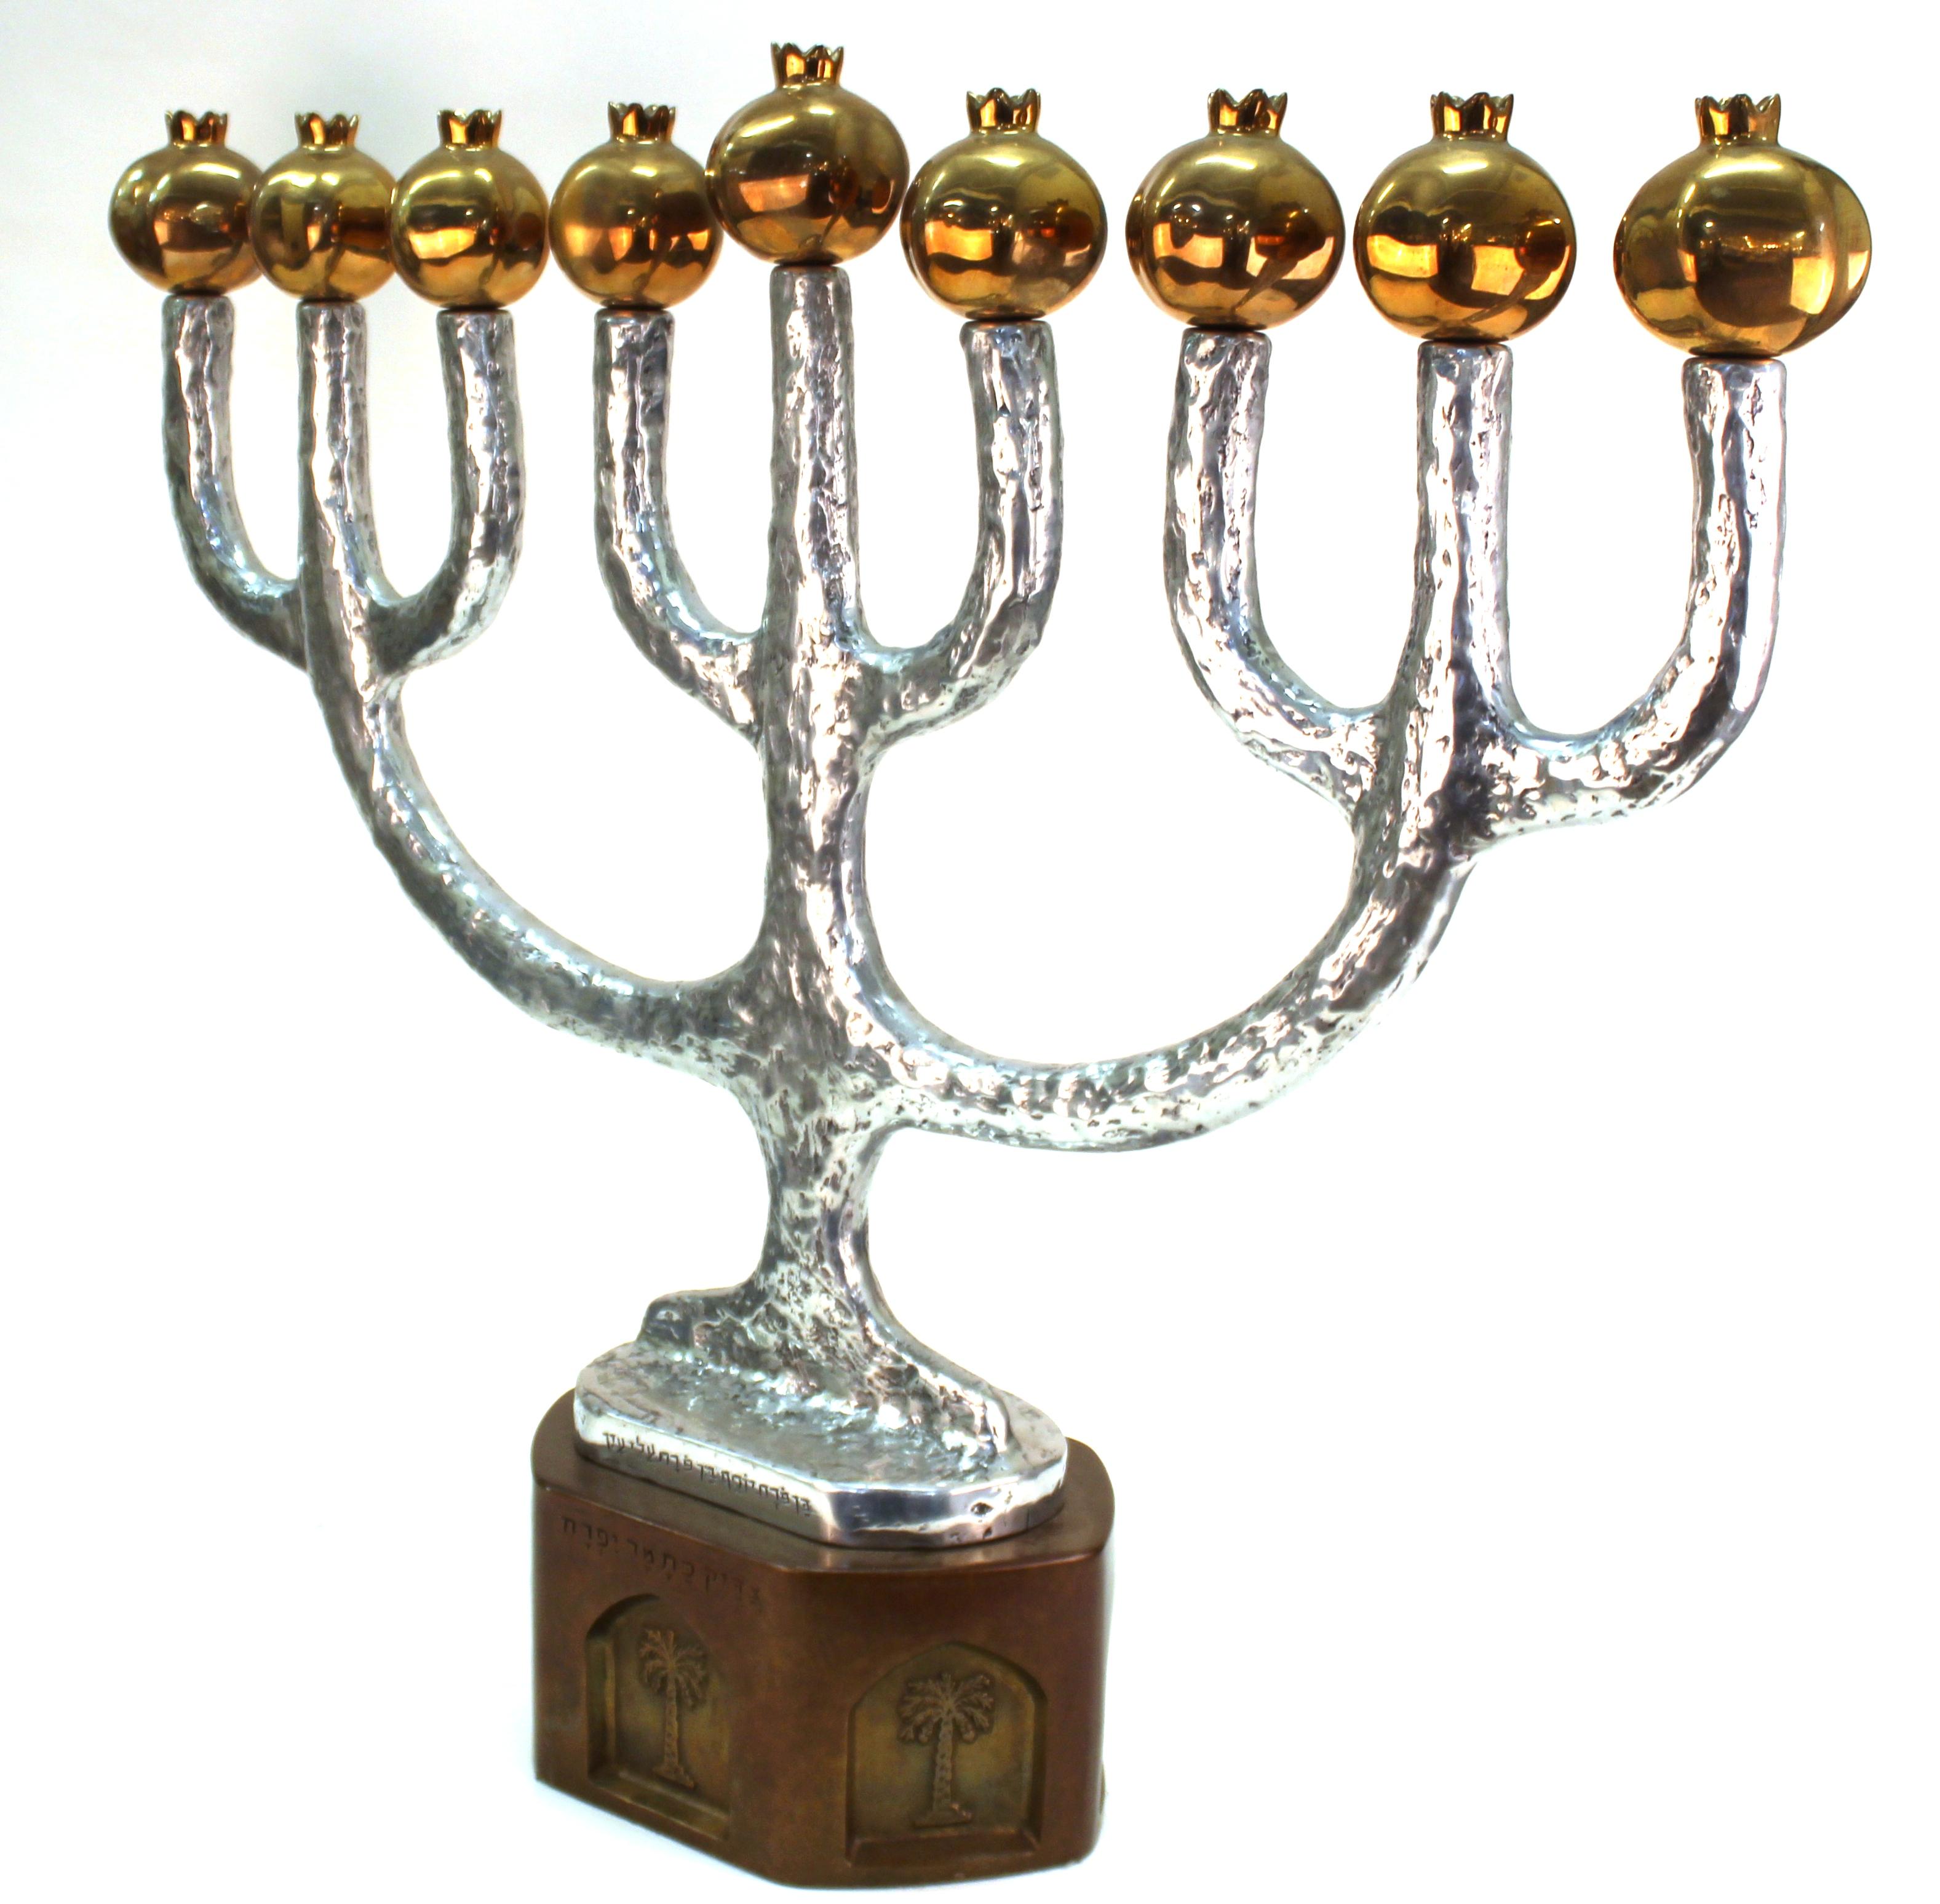 Modern bronze and cast aluminium monumental sized menorah by Oded Halahmy, created in 1997. Marked by the artist and dated on the side. In great vintage condition.